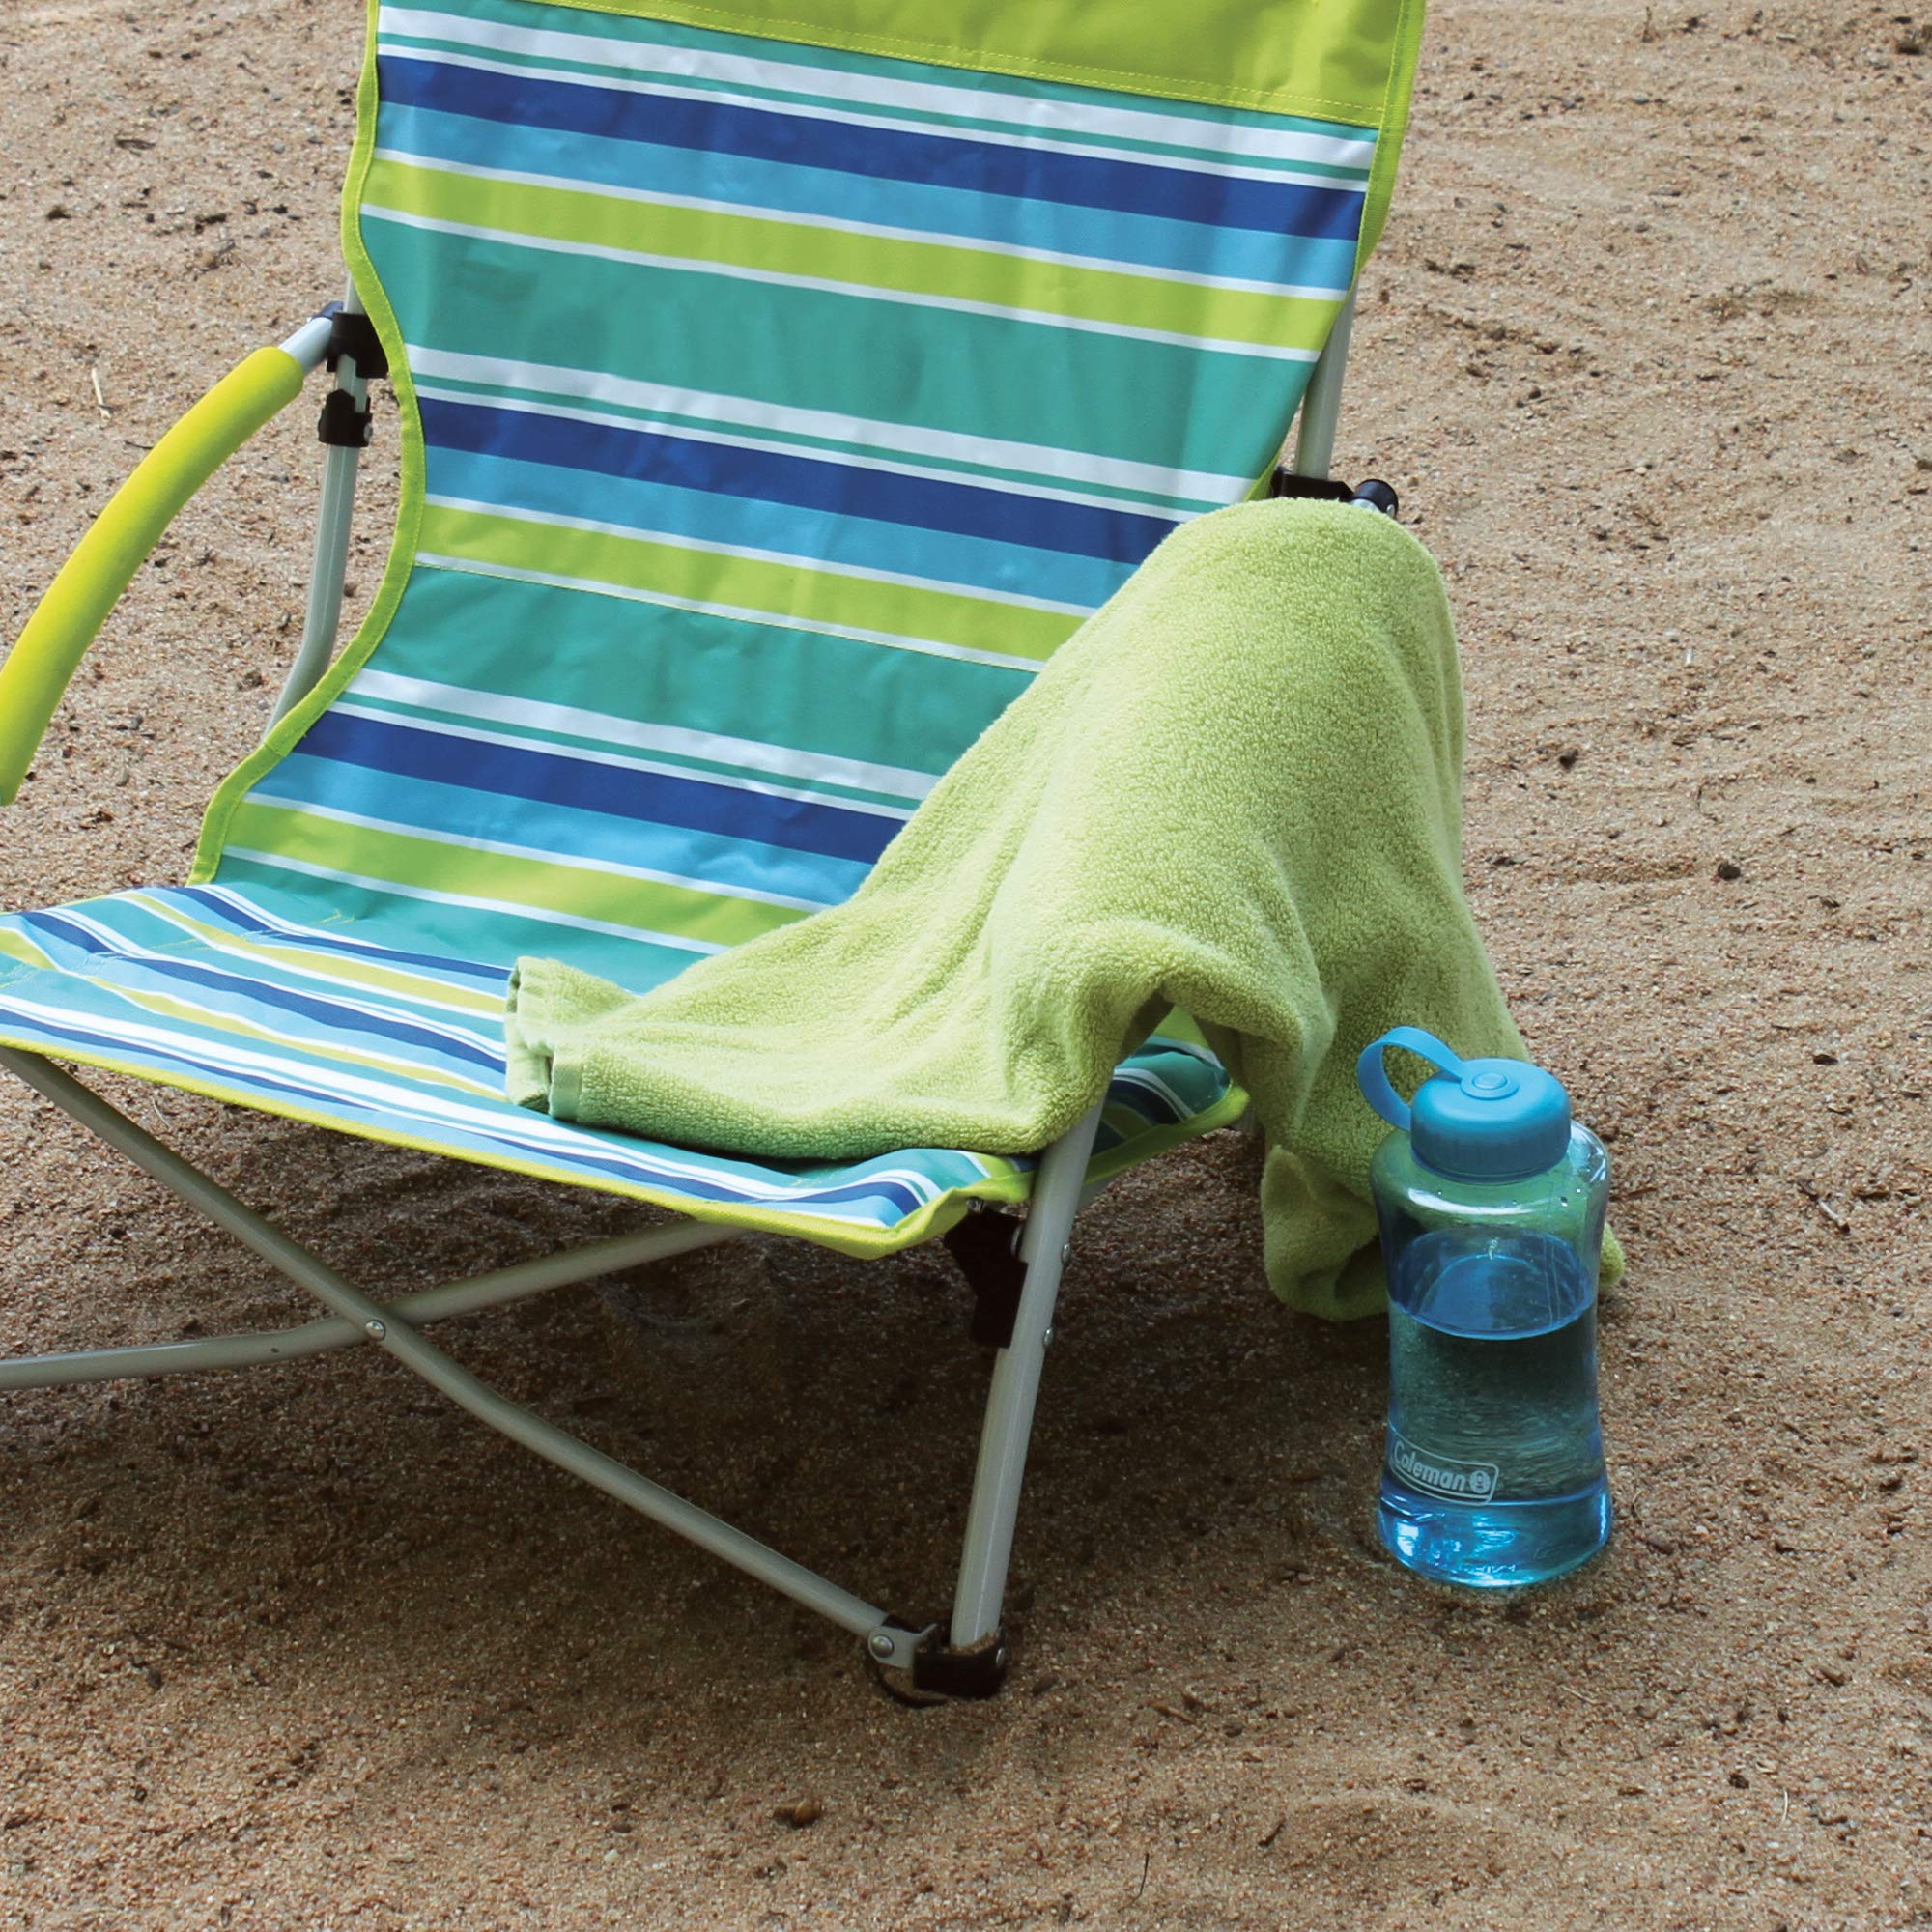 Coleman Utopia Breeze Beach Chair, Lightweight & Folding Beach Chair with Cup Holder, Seatback Pocket, & Relaxed Design; 21-inch Seat Supports up to 250lbs